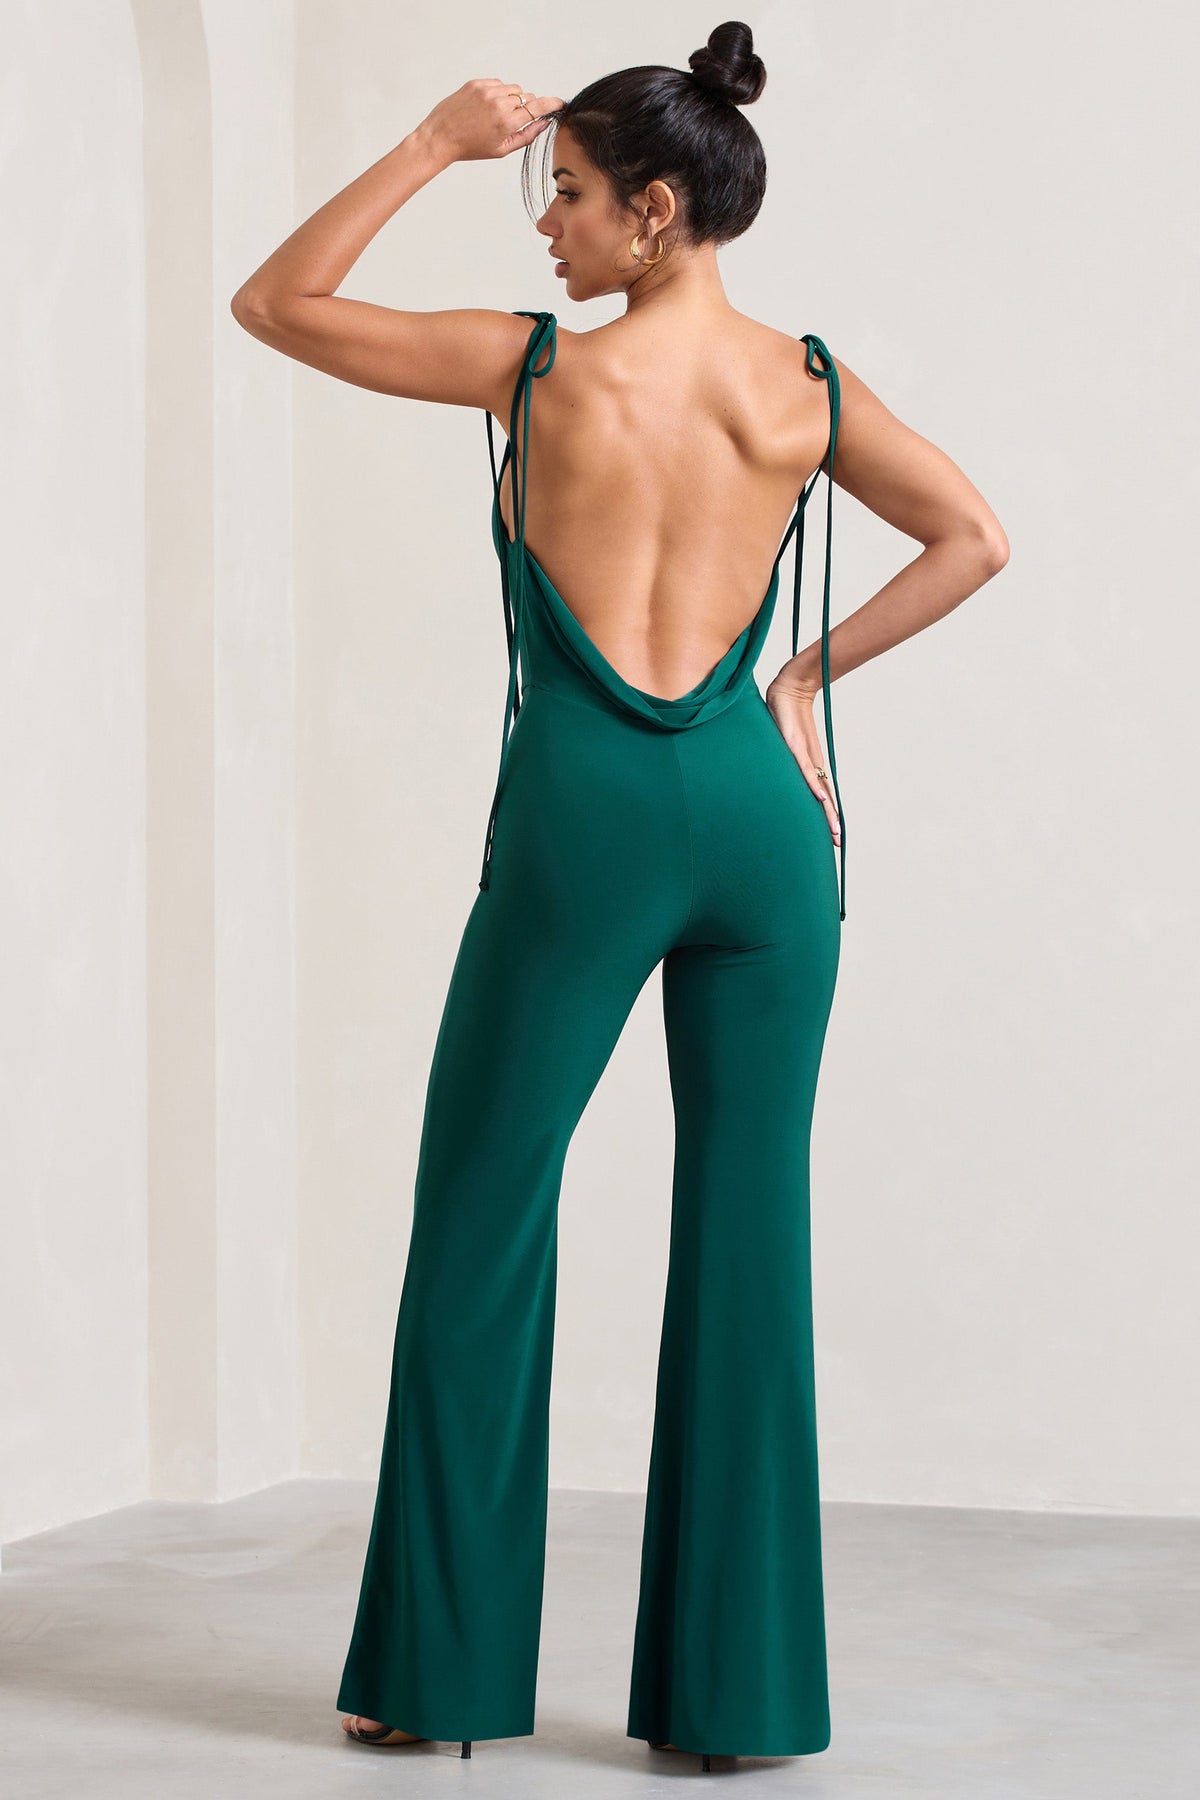 This Vuori Jumpsuit Is All I Want To Wear RN - The Mom Edit